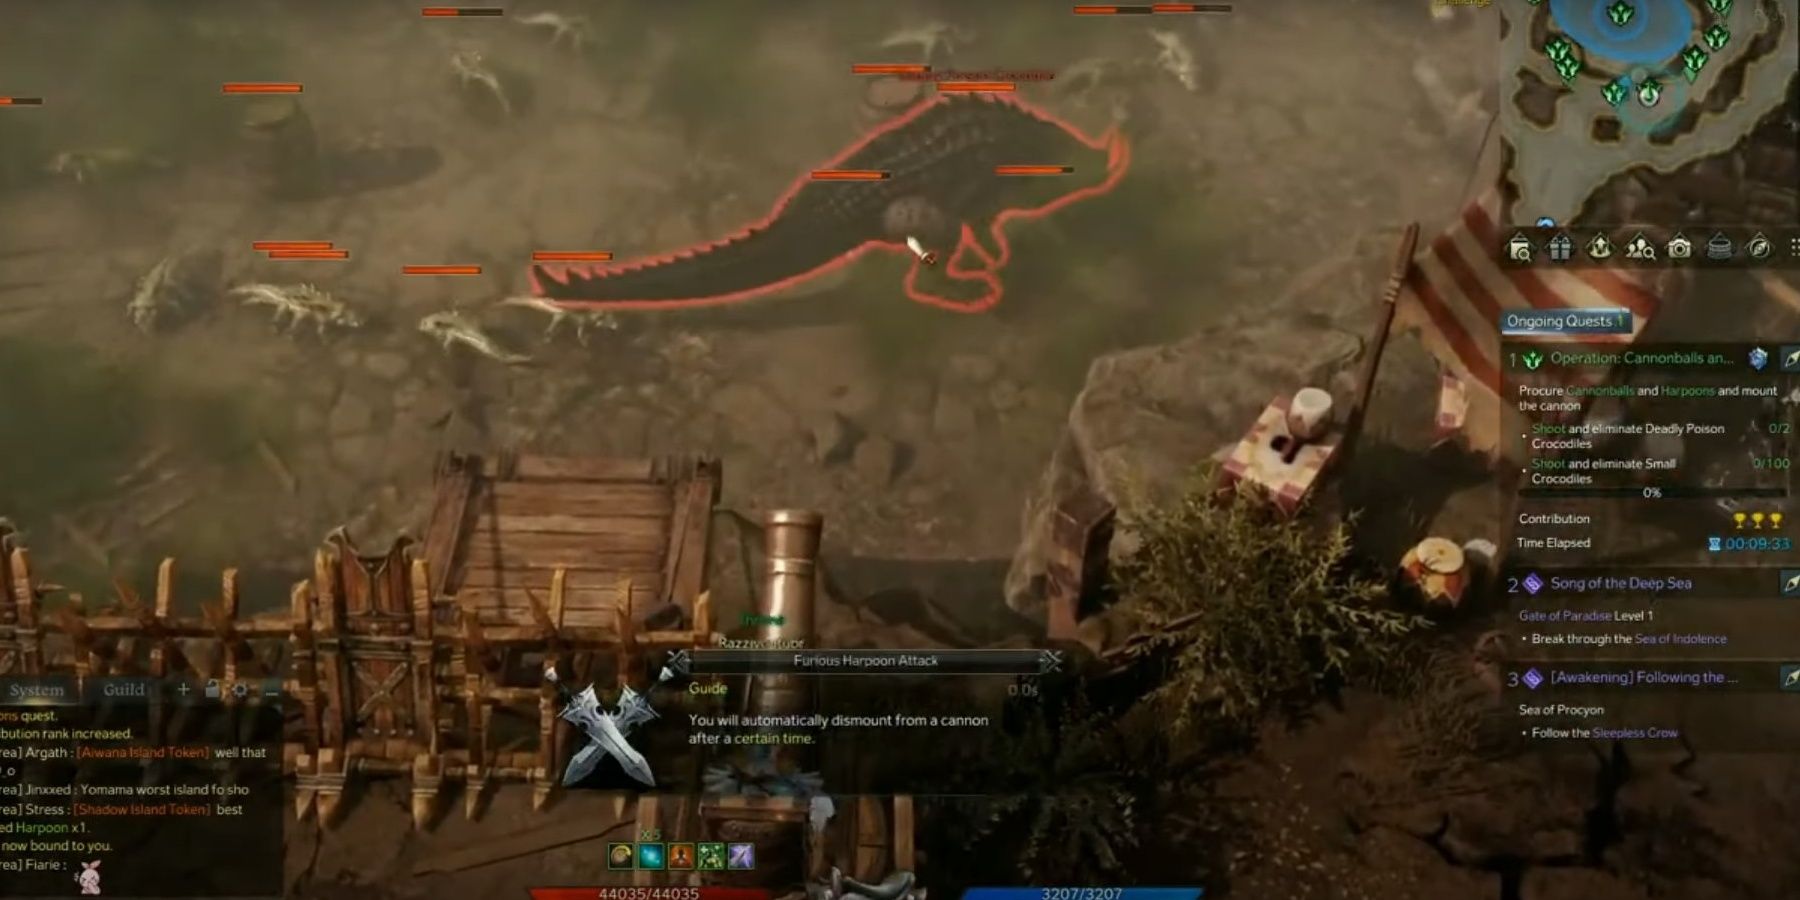 The Lost Ark character is participating in the Volare Island Event where they are shooting cannonballs and harpoons at crocodile creatures that are spawning.